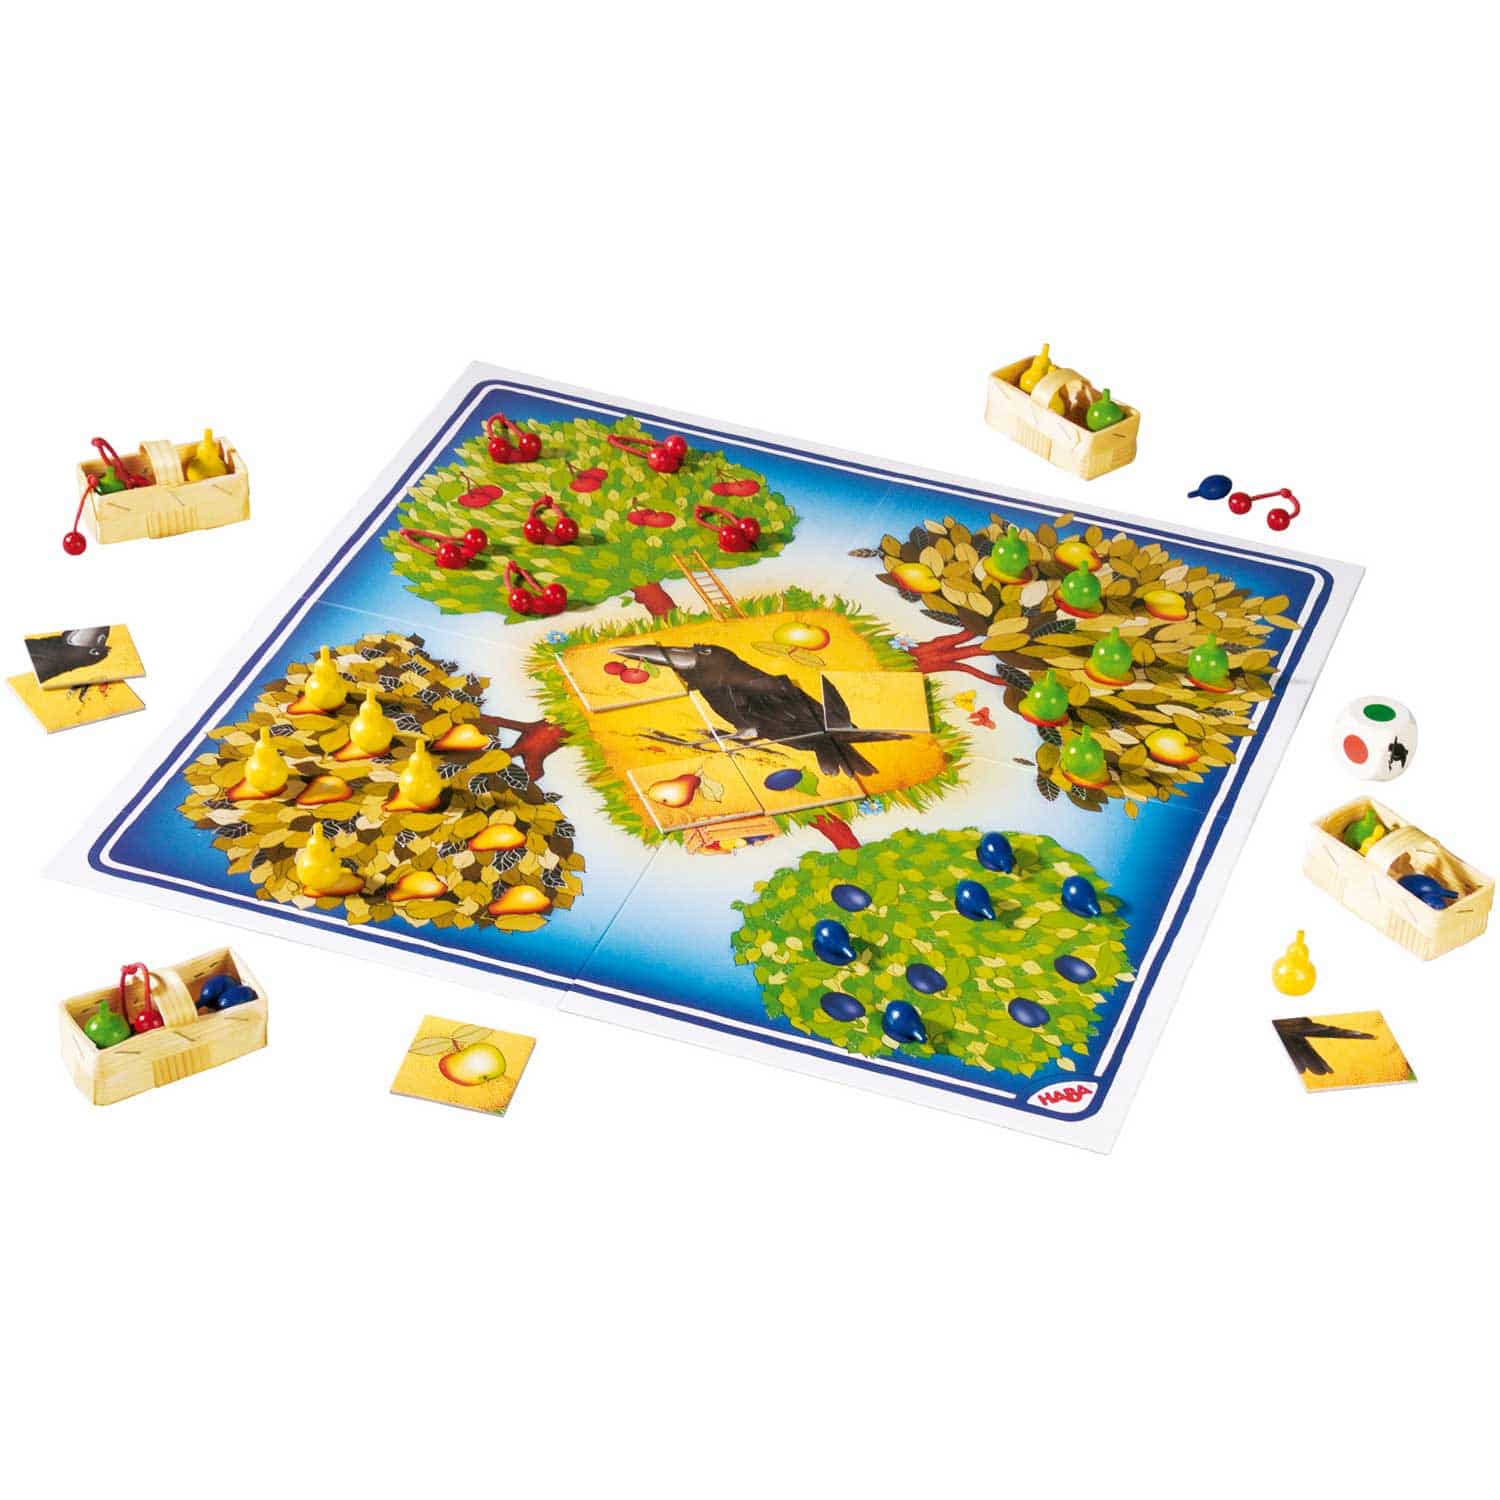 Orchard Cooperative Board Game by Haba